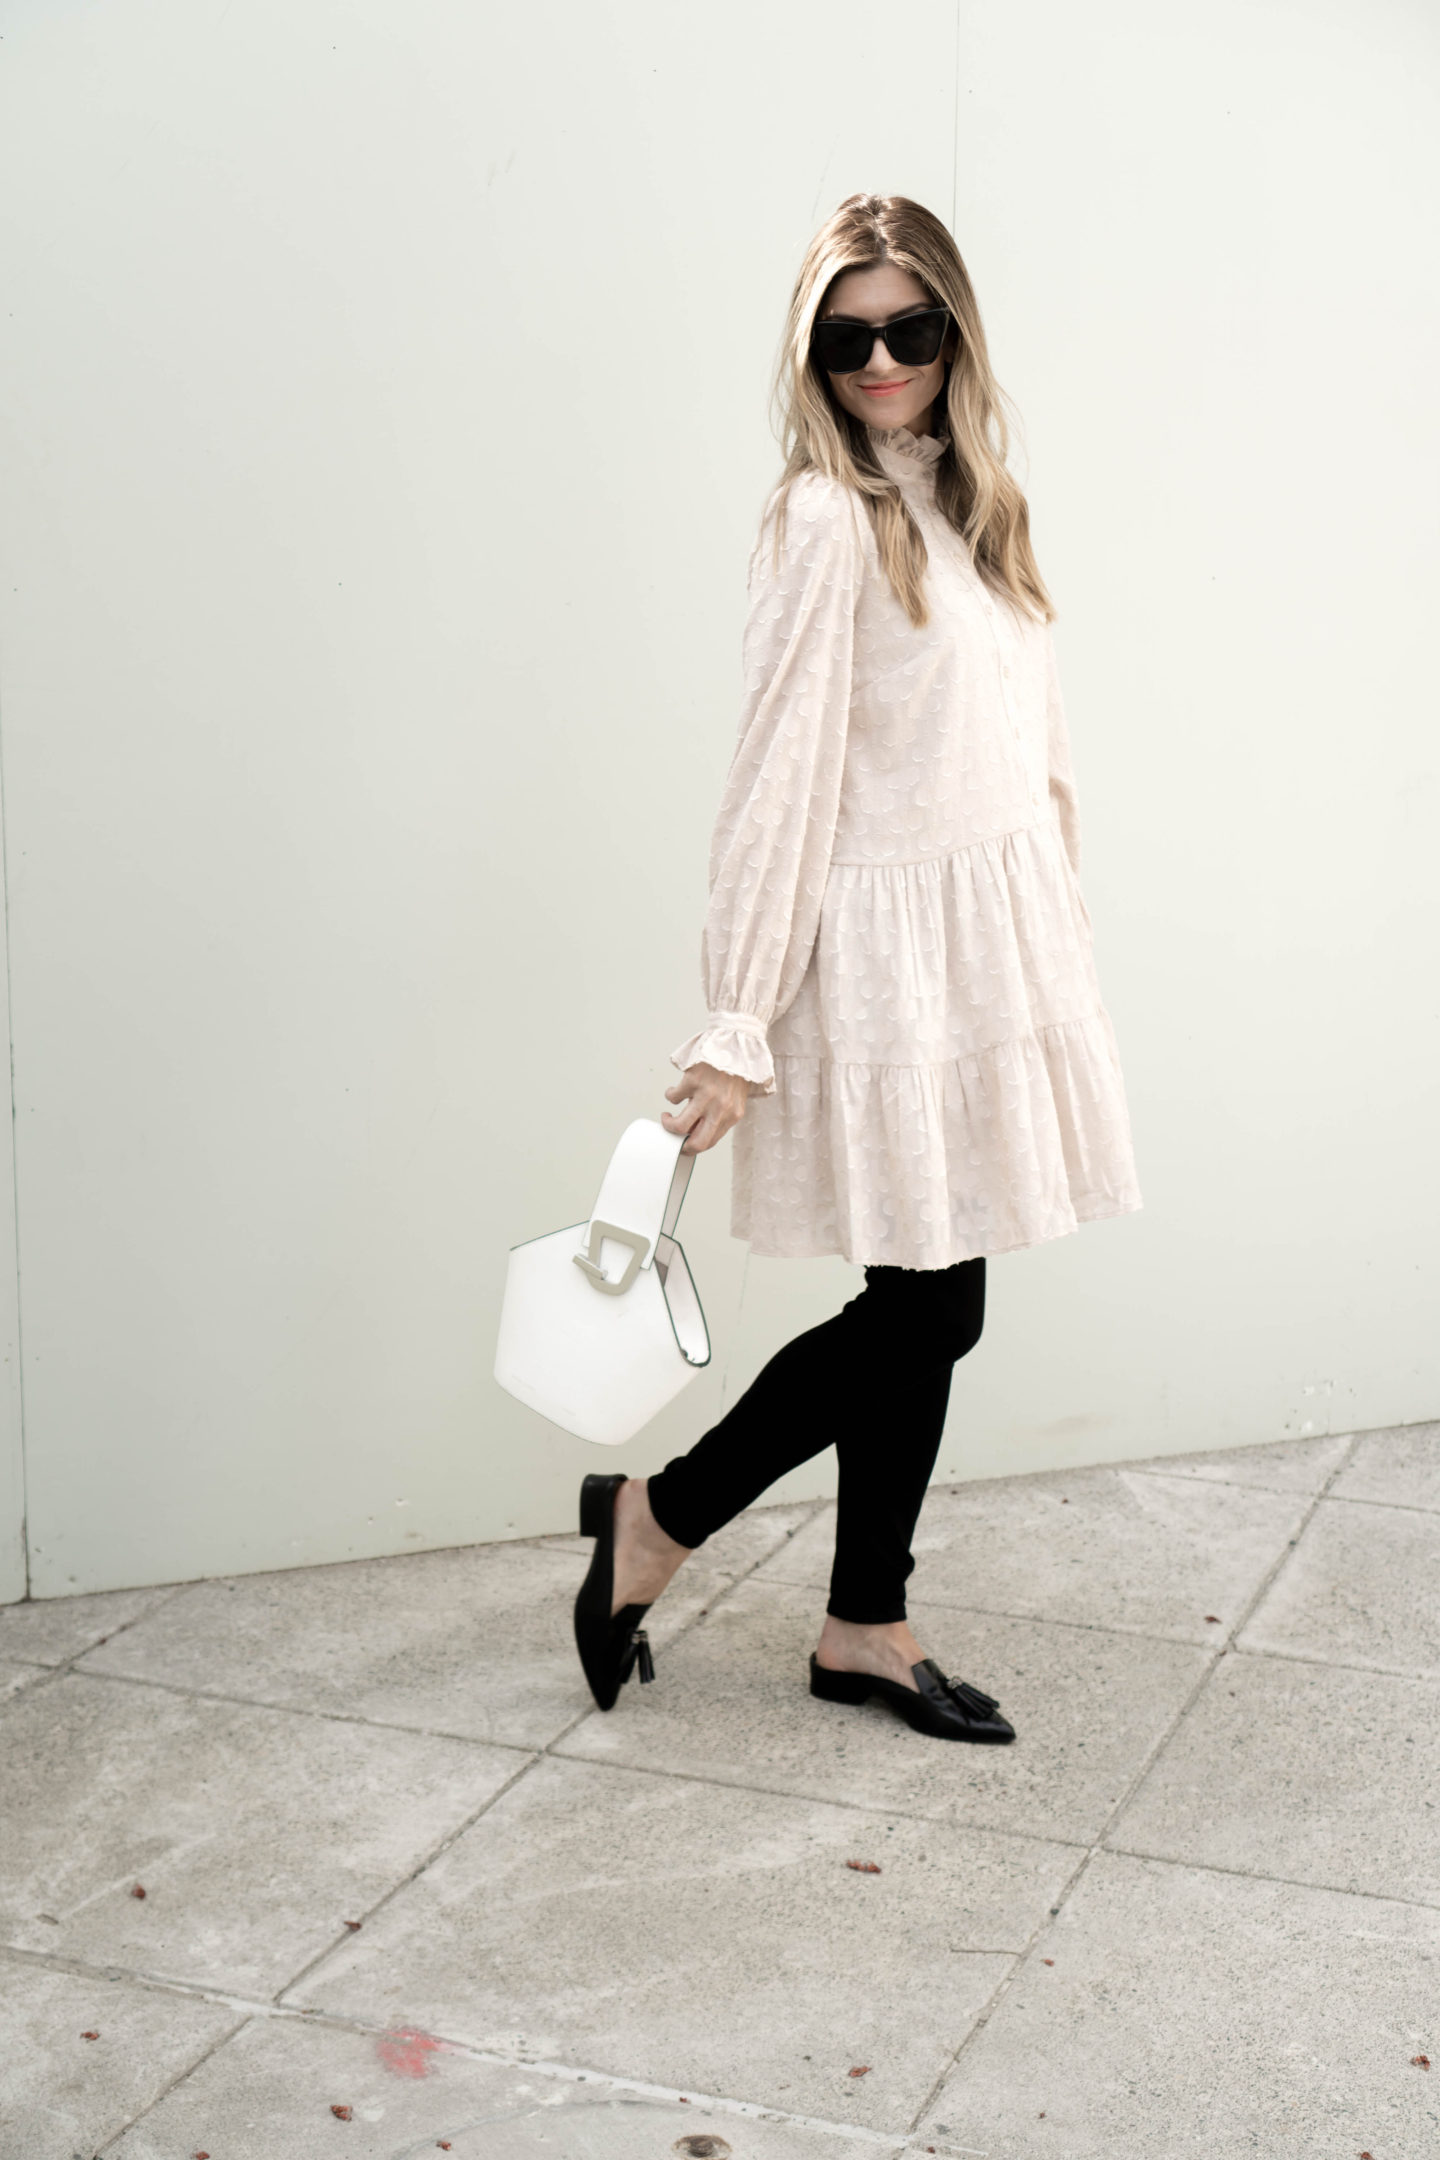 The Grey Edit - Pregnancy Style Tips - Work to Evening Spring Look - H&M Neutral Tunic Dress - Styled Out West Collaboration